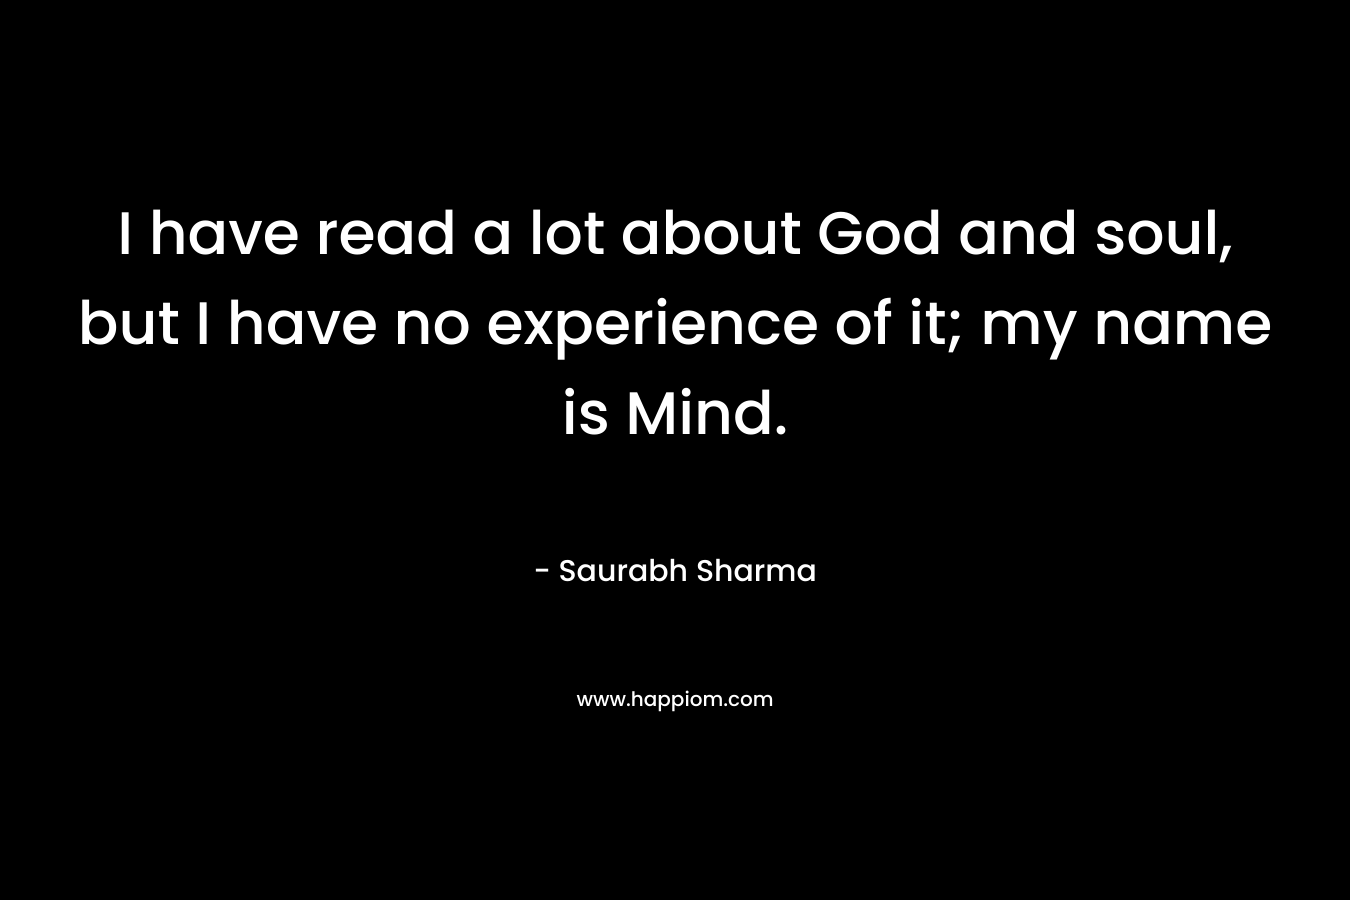 I have read a lot about God and soul, but I have no experience of it; my name is Mind.